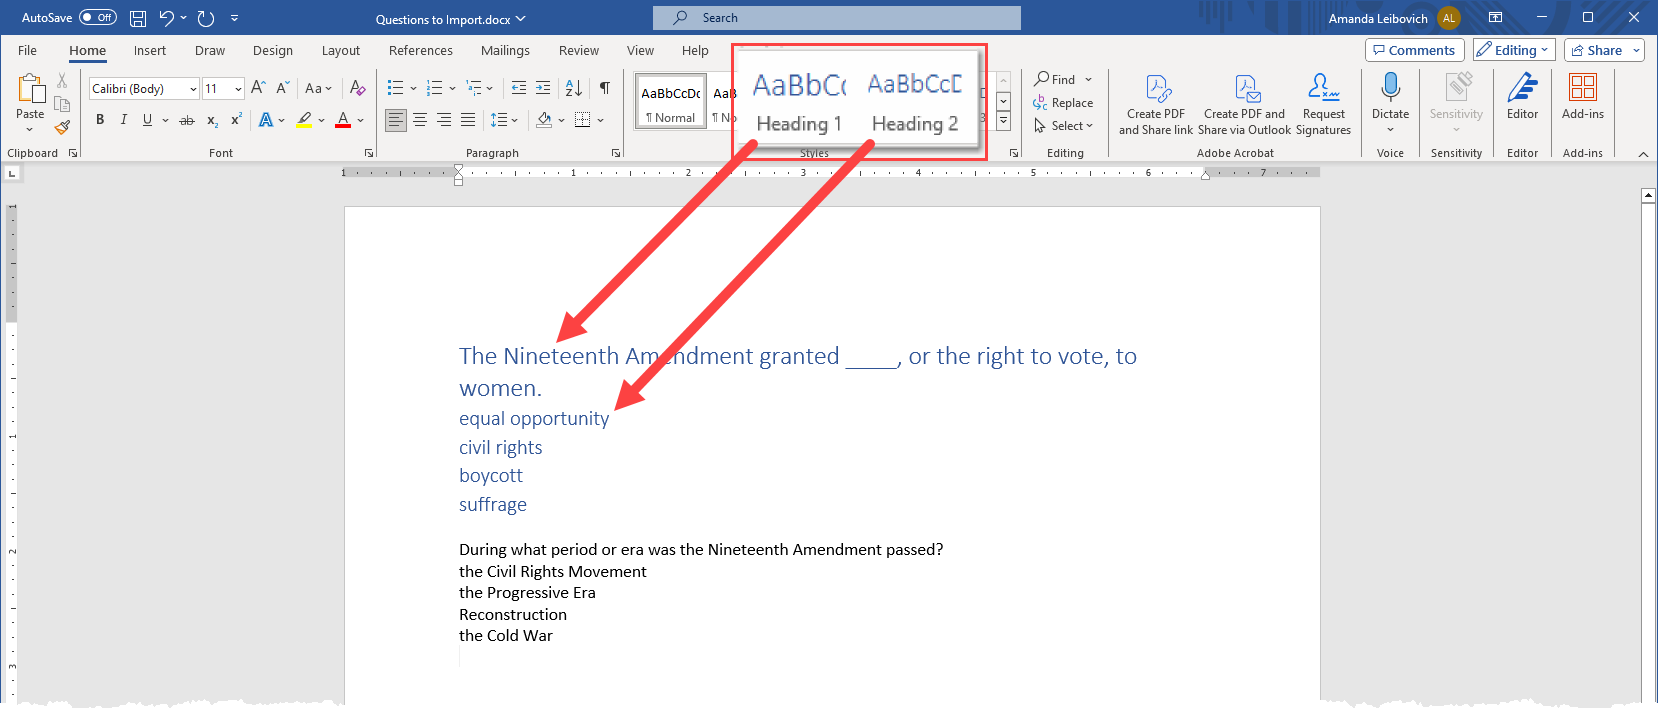 Word document with Heading 1 and 2 identified for each question part